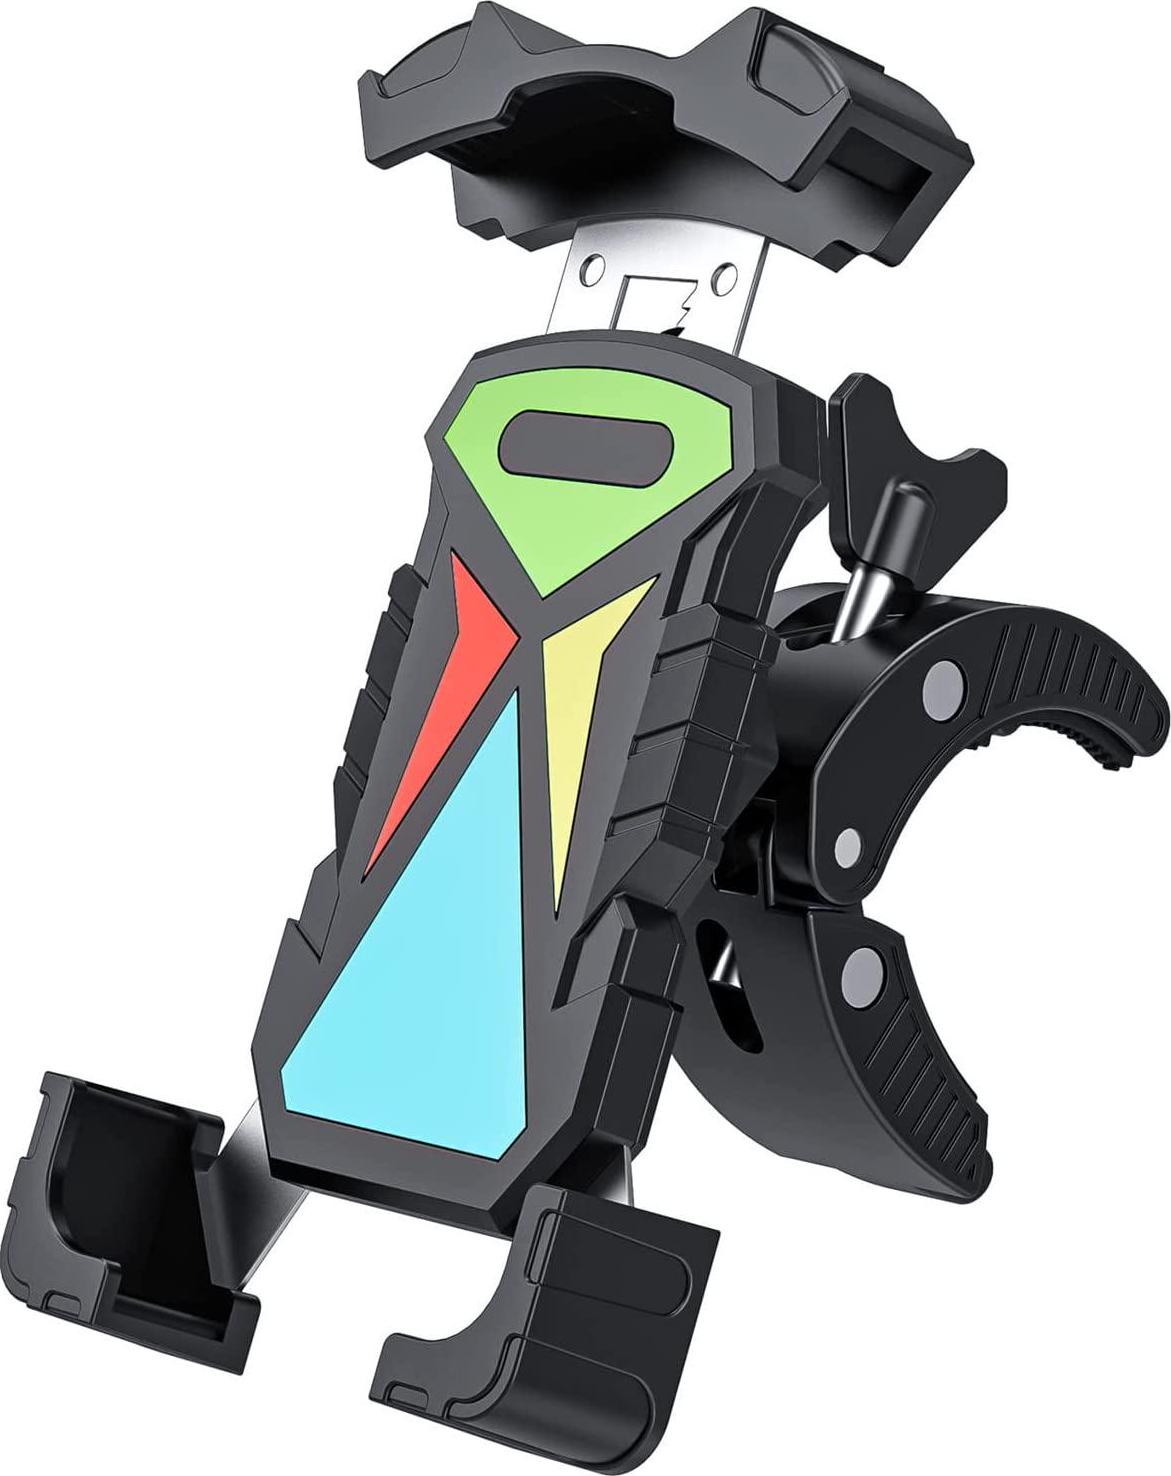 LYZYD, LYZYD Phone Mount for Bike Handlebars Cell Phone Handlebar Mount Motorcycle Phone Holder for Bicycle One Hand Operation Universal Clip for Scooter ATV Stroller - Multi-Colored